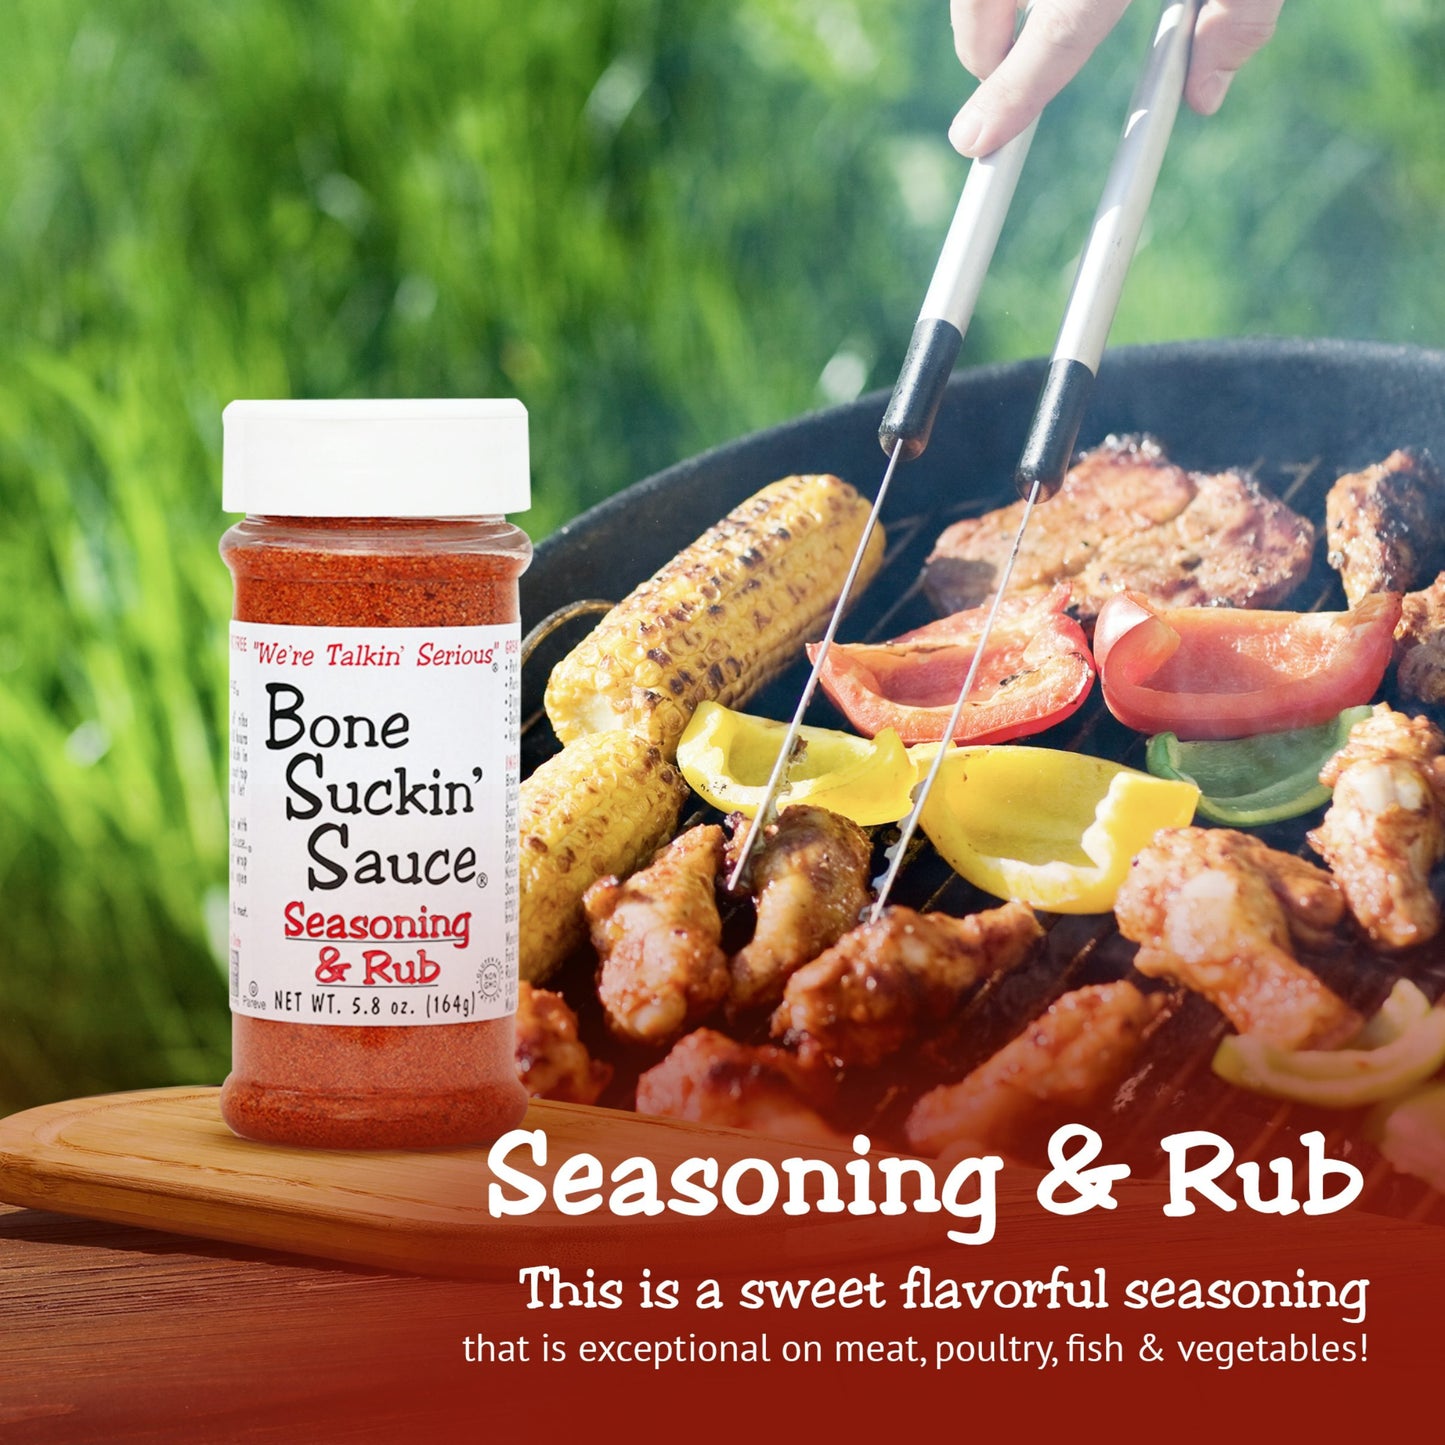 Bone Suckin' Seasoning & Rub - This is a sweet flavorful seasoning that is exceptional on meat, poultry, fish & vegetables!